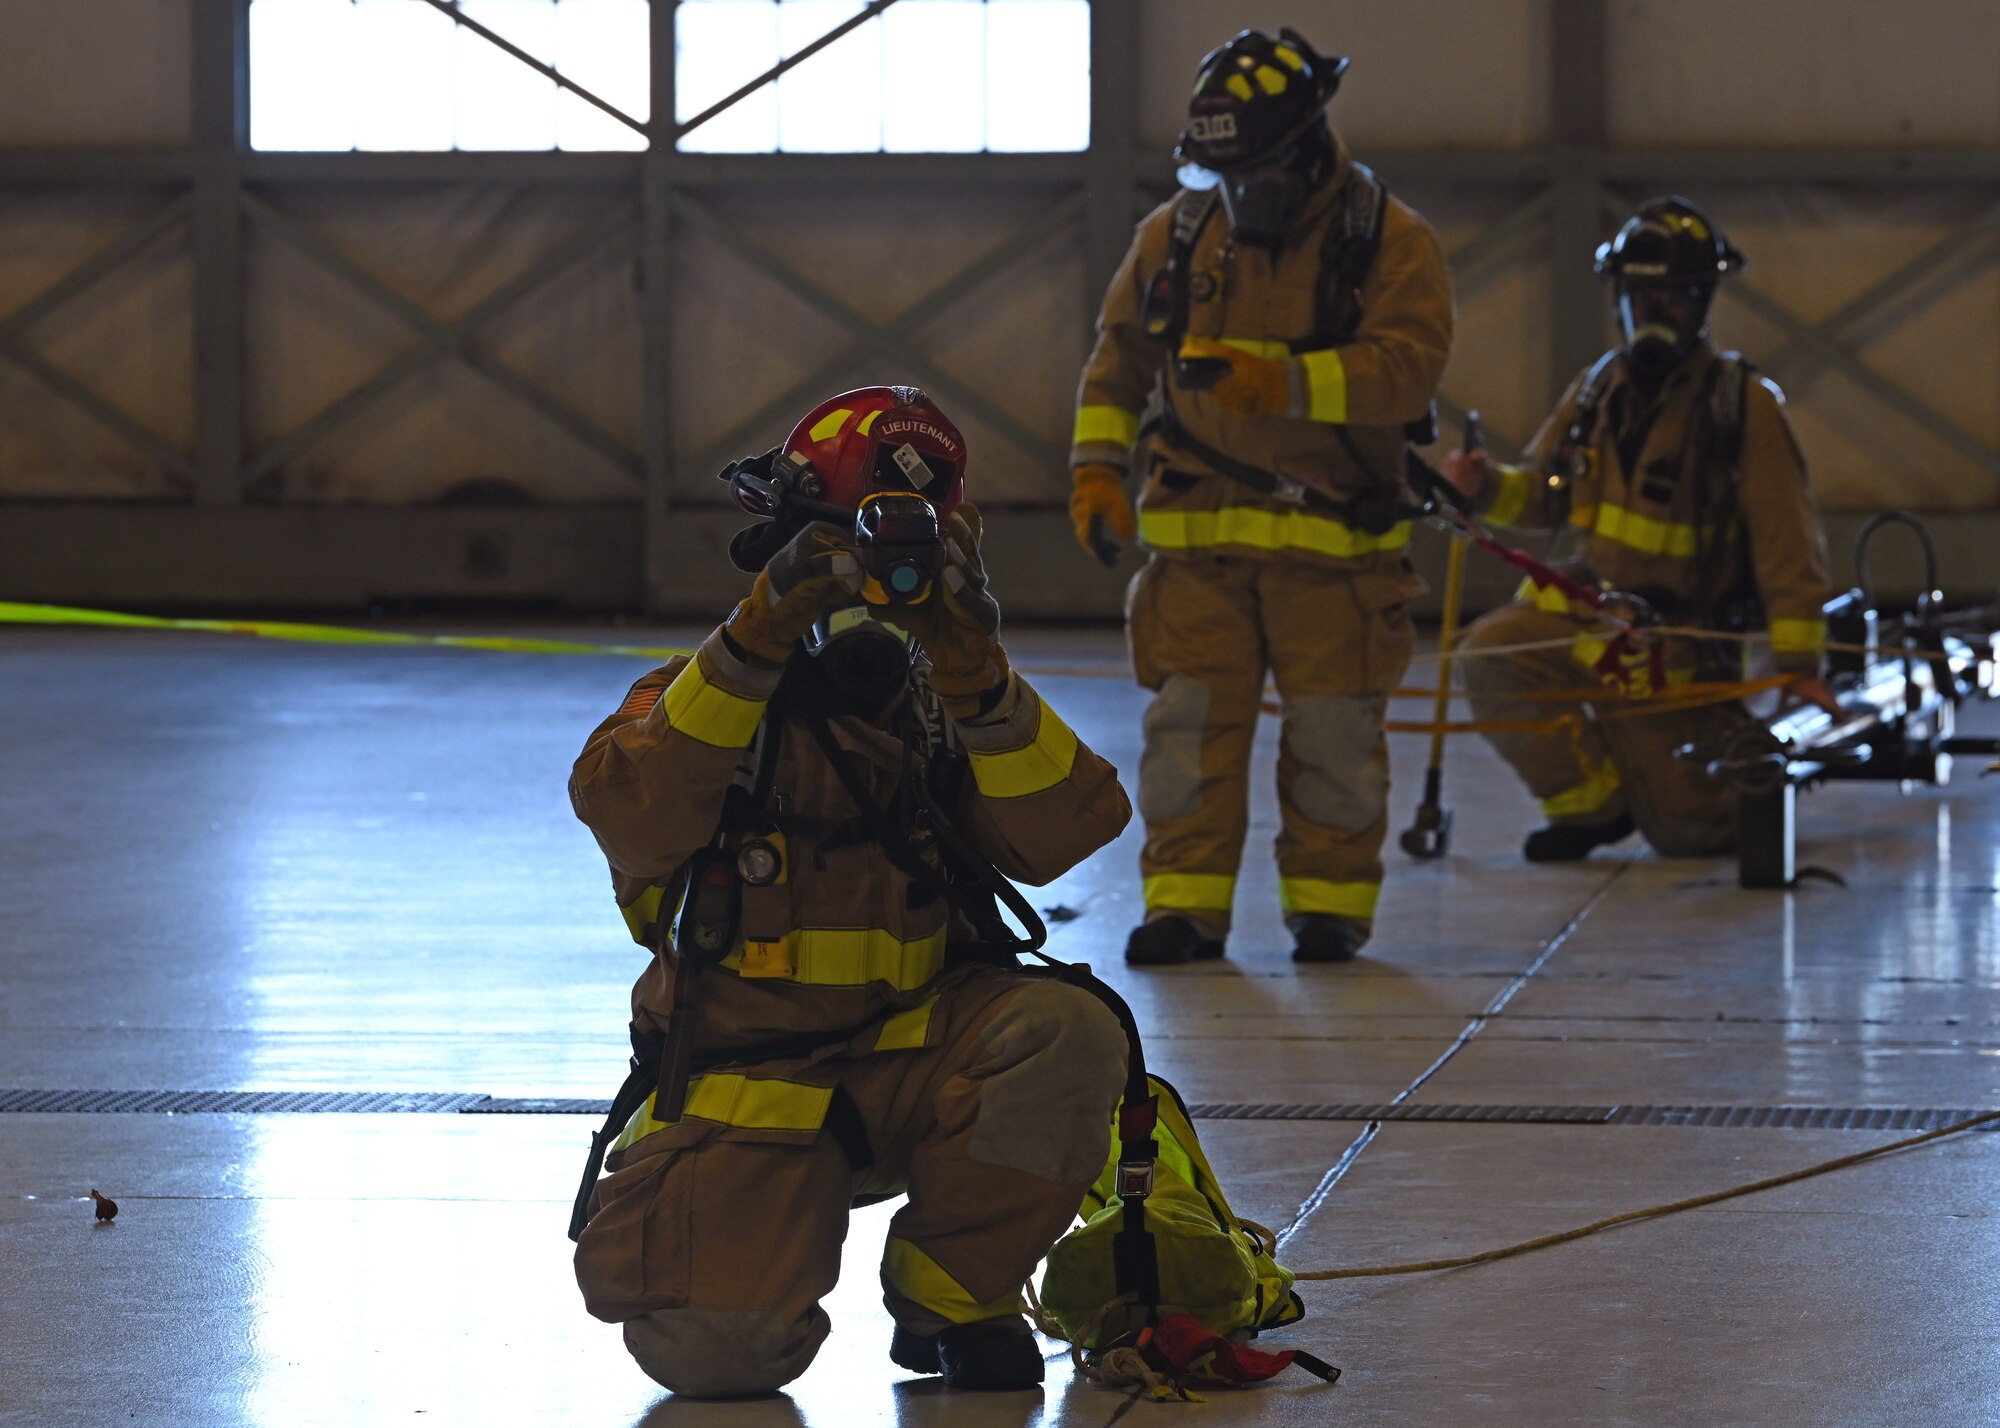 Lewis-McChord Fire and Emergency Services emergency responders participate in a simulated emergency at a hangar during Exercise Rainier War 21B at Joint Base Lewis-McChord, Washington, Nov. 8, 2021. Rainier War is a semi-annual, large readiness exercise led by 62nd Airlift Wing, designed to train Airmen under realistic scenarios that support a full spectrum readiness operations against modern threats and replicate today’s contingency operations. (U.S. Air Force photo by Senior Airman Zoe Thacker)